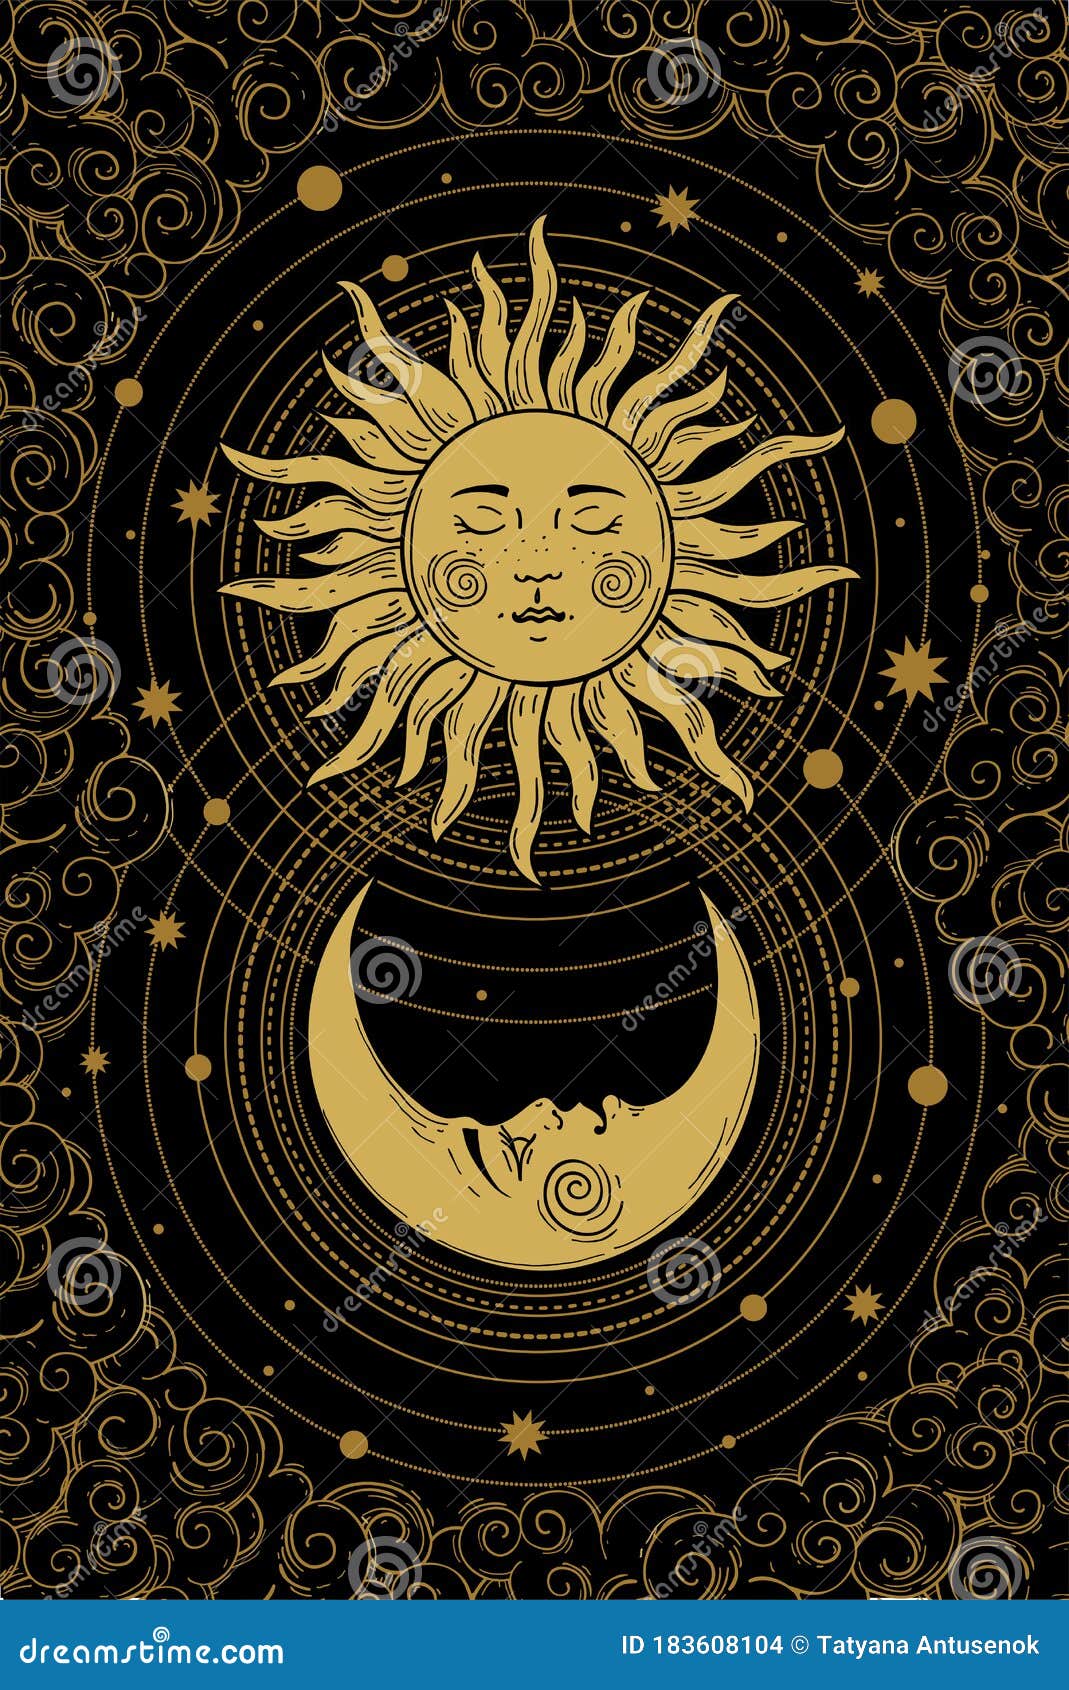 celestial golden crescent moon pattern with face, sun and clouds on a black background. boho  s for tarot